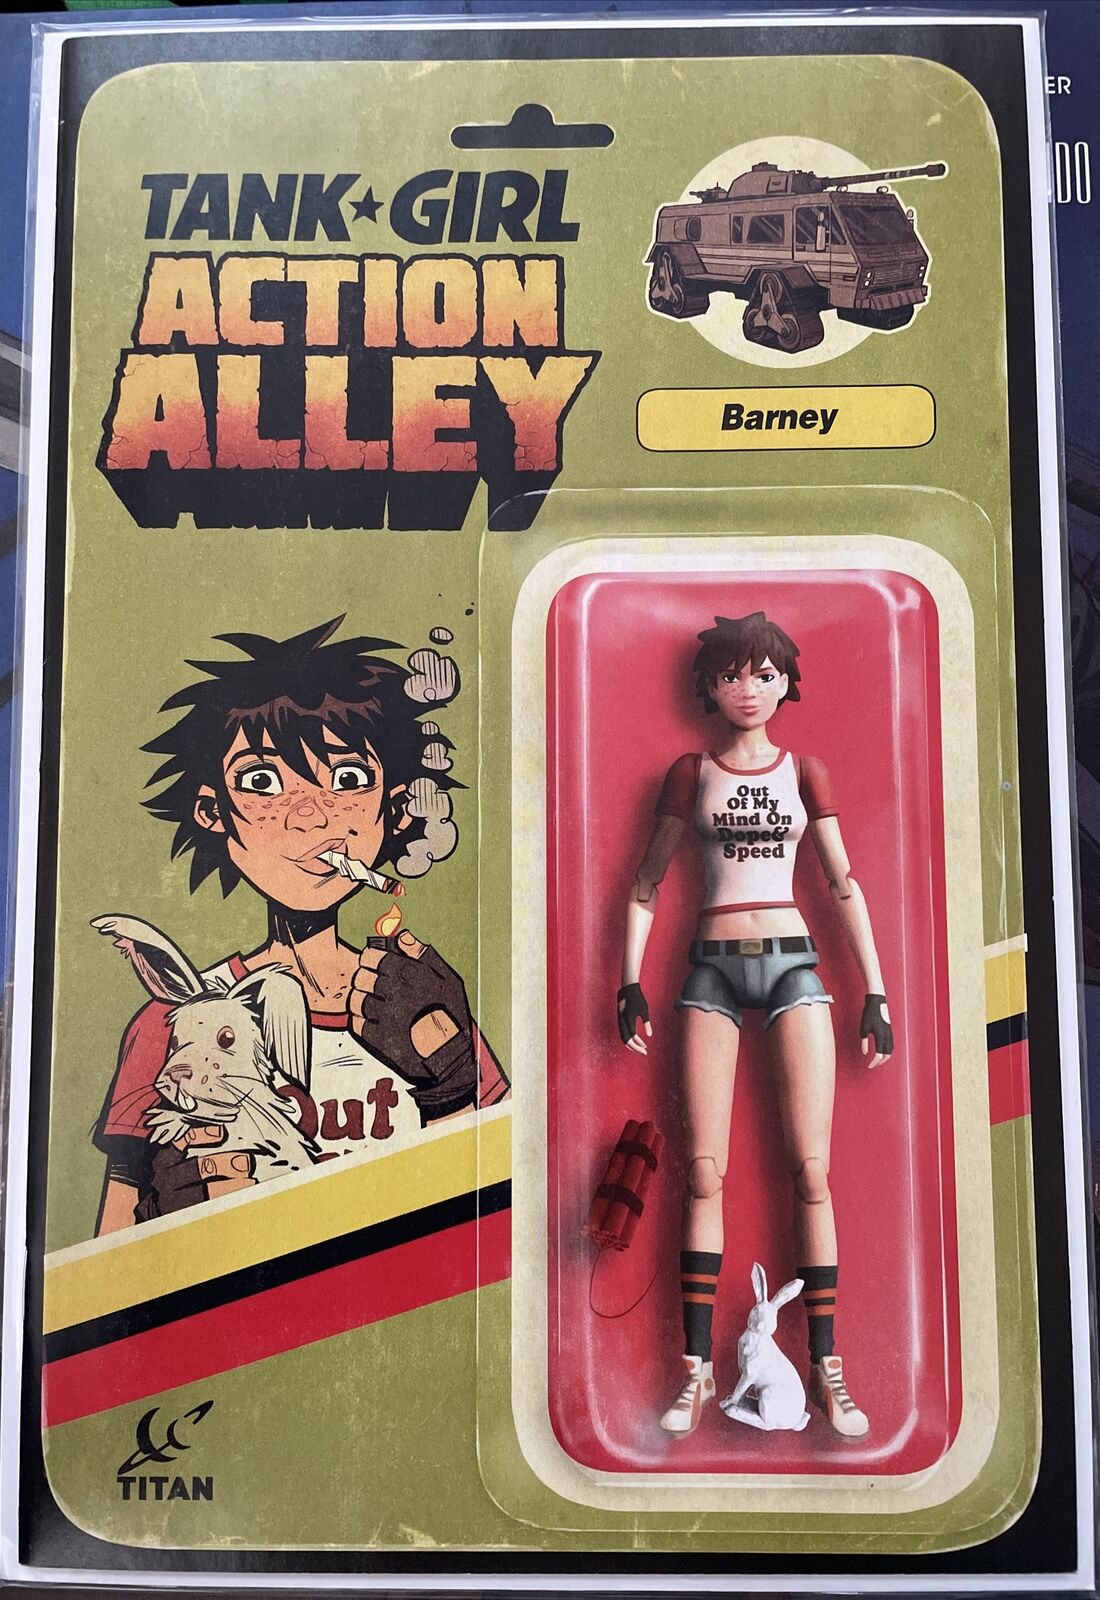 TANK GIRL #3 Action Alley #3 Cover B Action Figure Variant 2019 Titan Comics